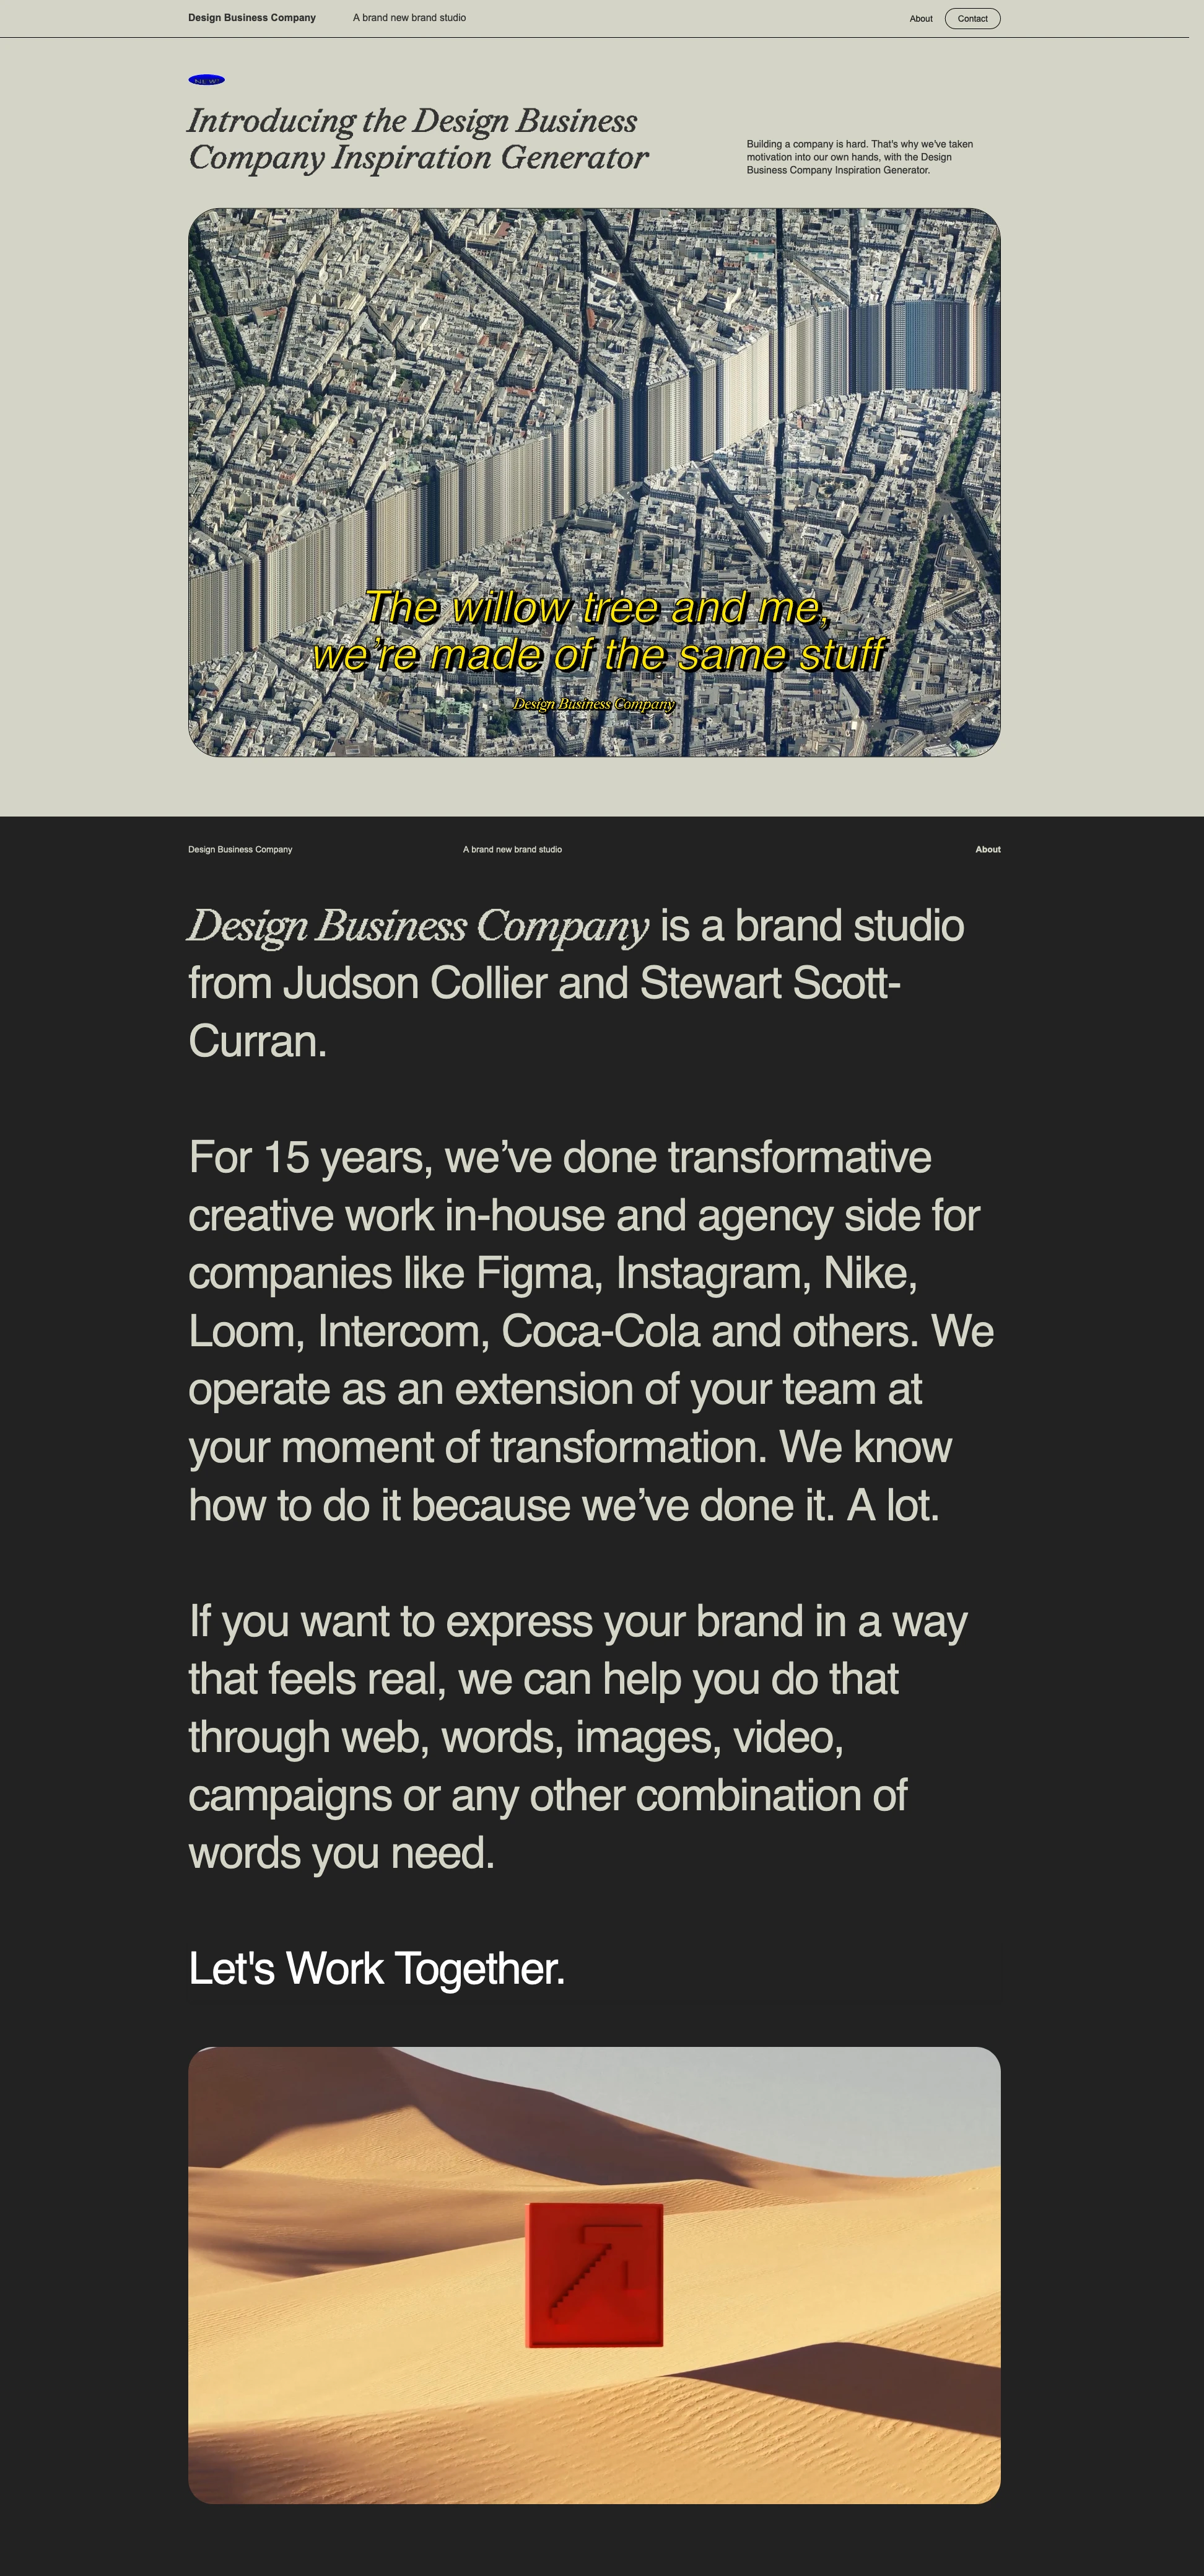 Design Business Company Landing Page Example: Building a company is hard. That's why we've taken motivation into our own hands, with the Design Business Company Inspiration Generator.